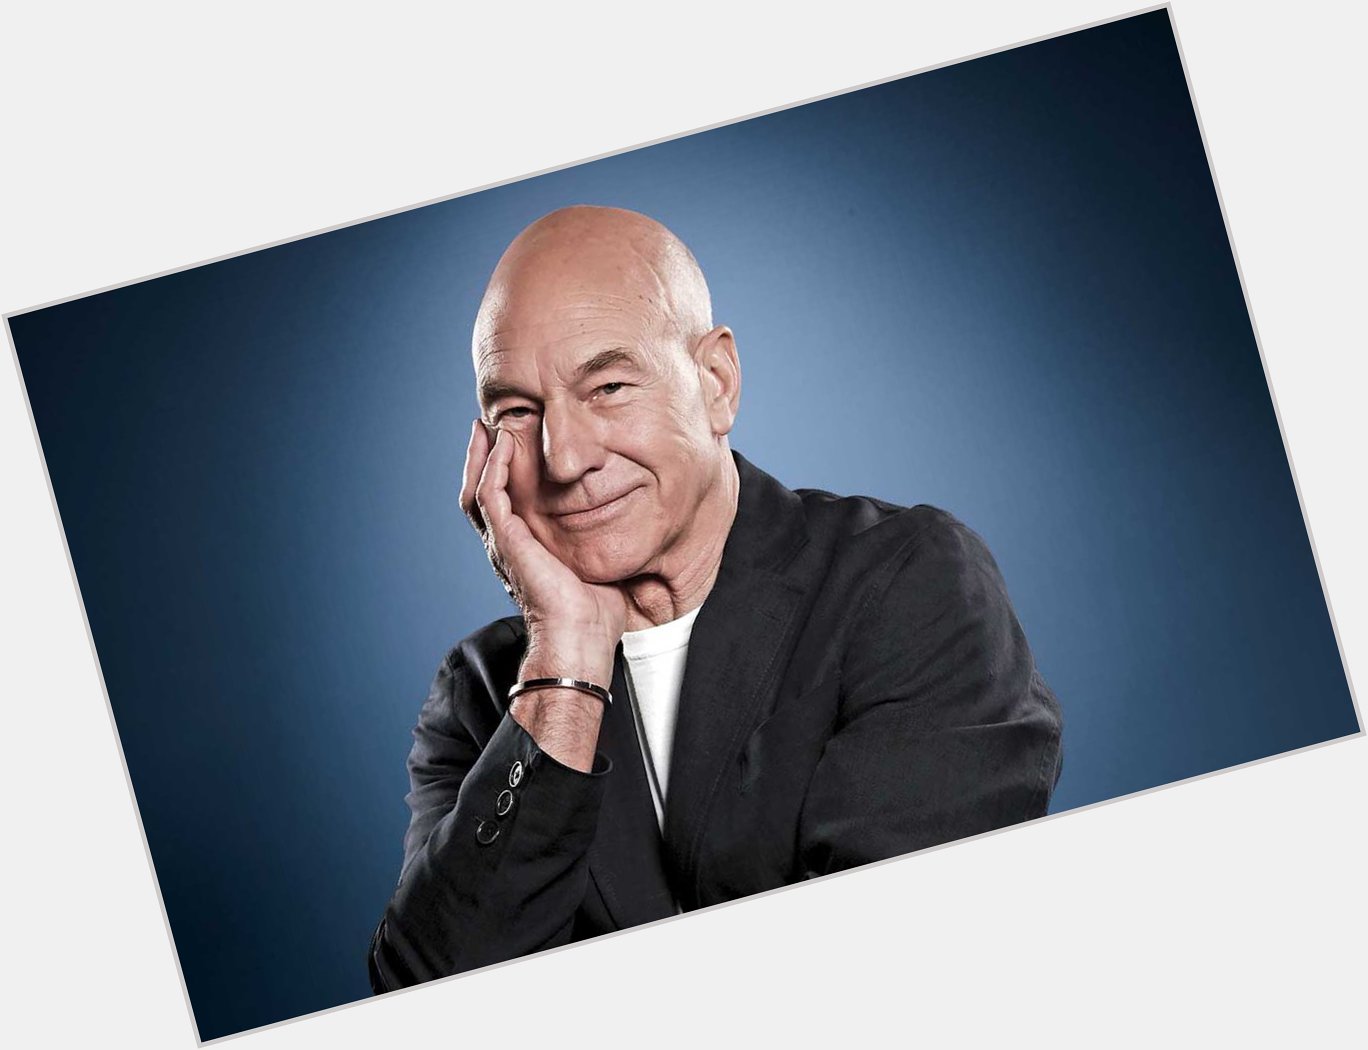 Happy birthday Patrick Stewart! You\ve been an inspiration to many and I look forward to your future! 